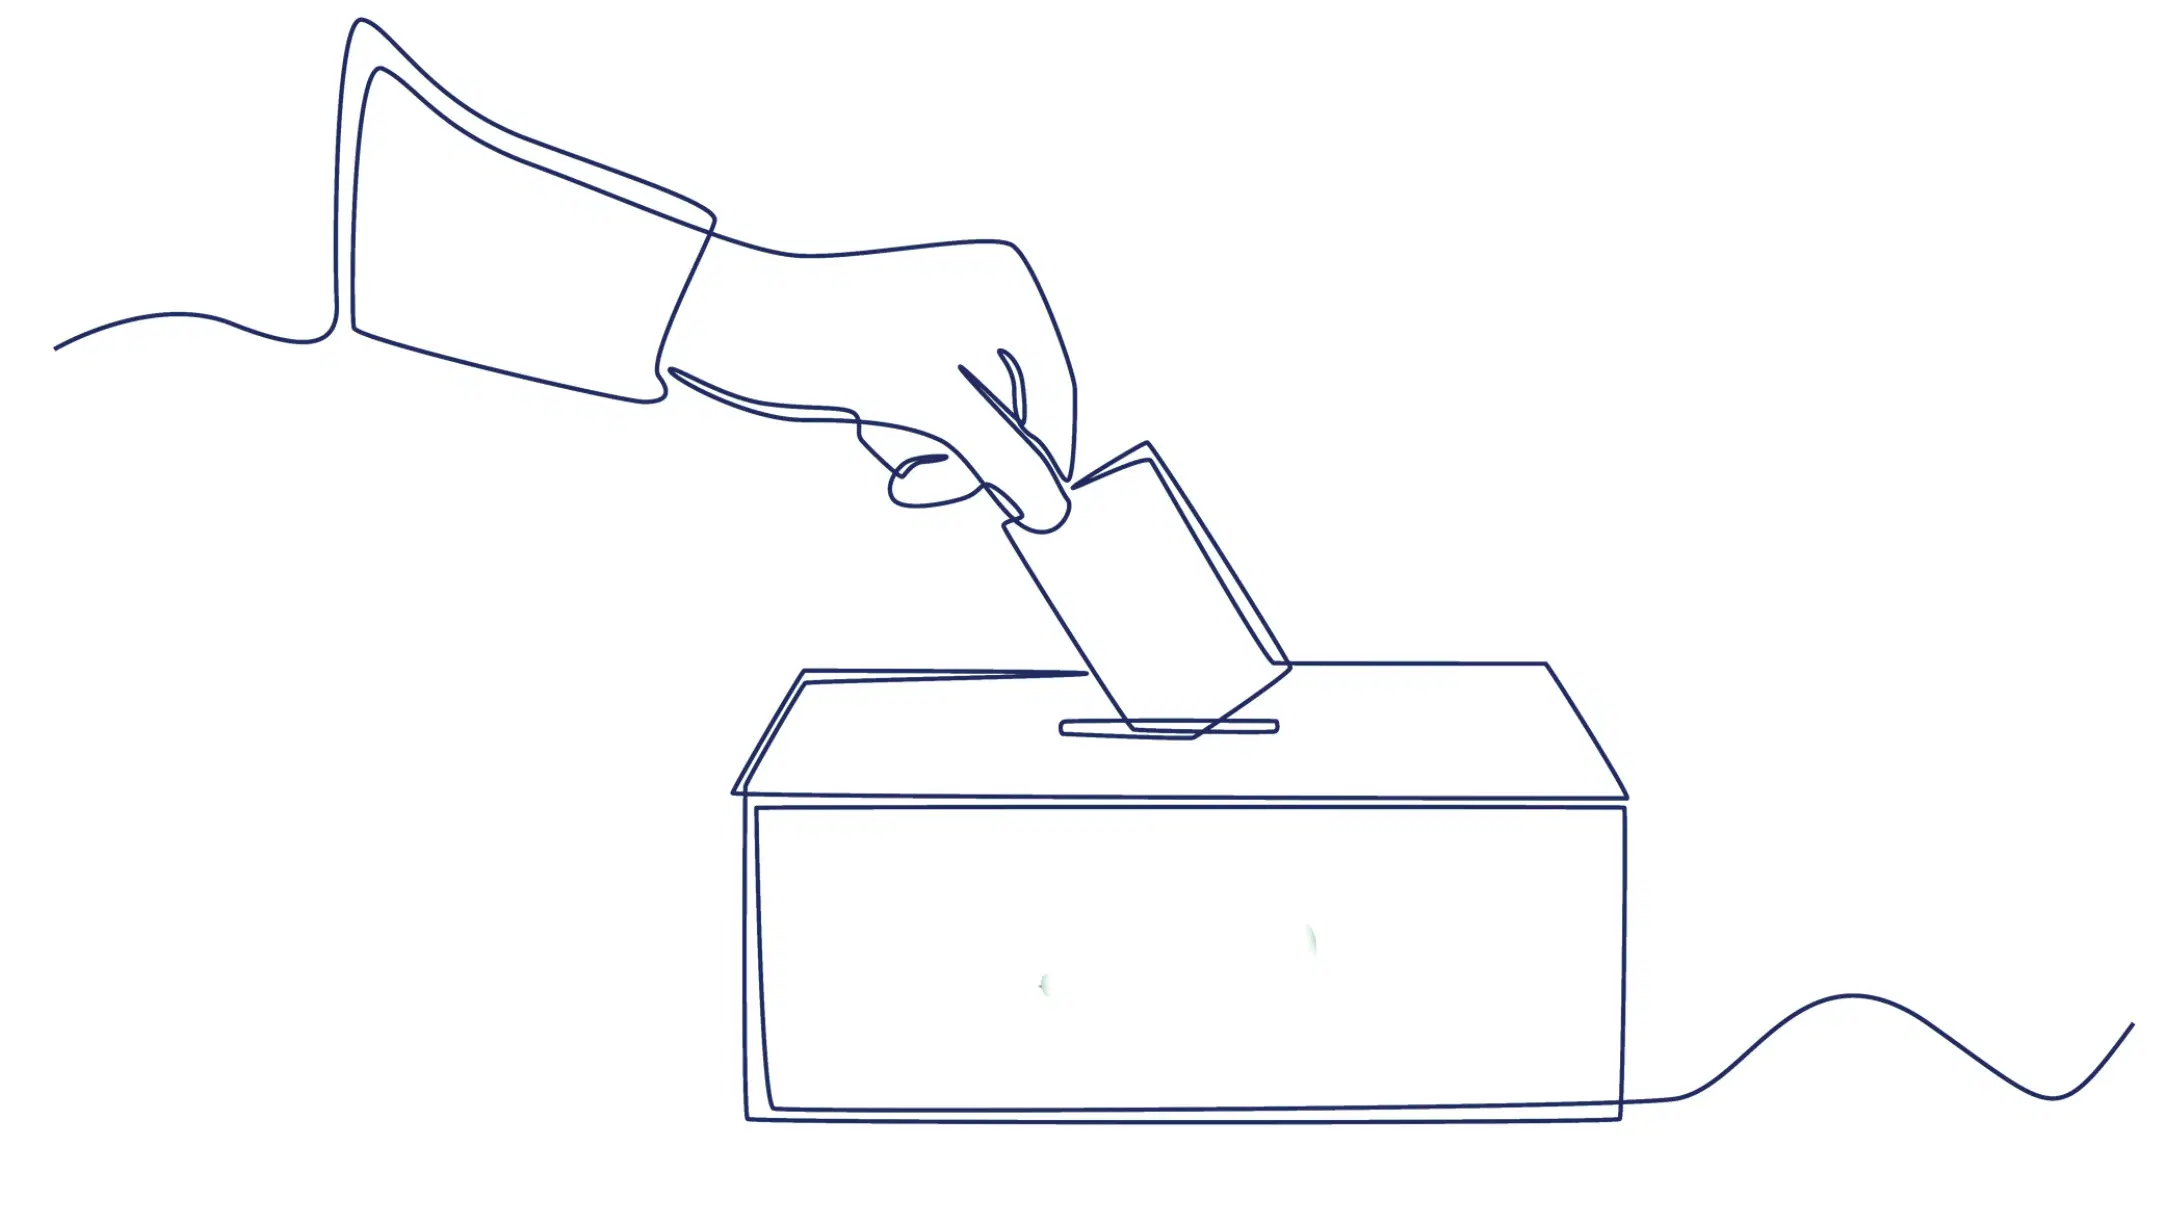 2023: APRIL 06 // Combining Forces: Overcoming Barriers to Jail-Based Voter Registration